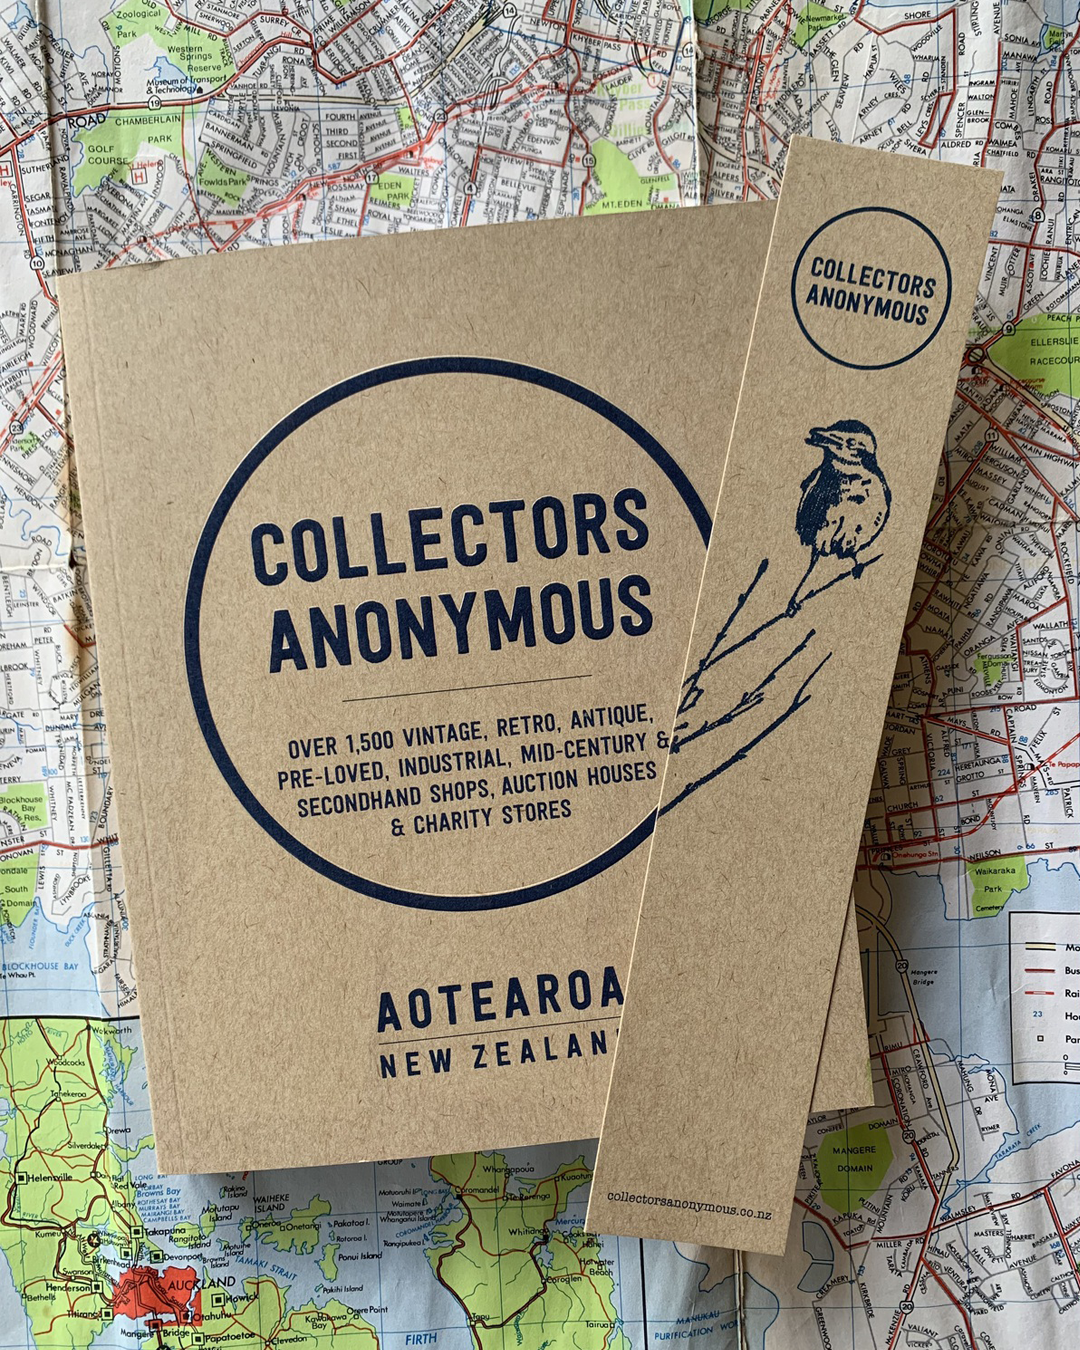 A recycled paper book titled 'Collectors Anonymous' sitting on top of a map.